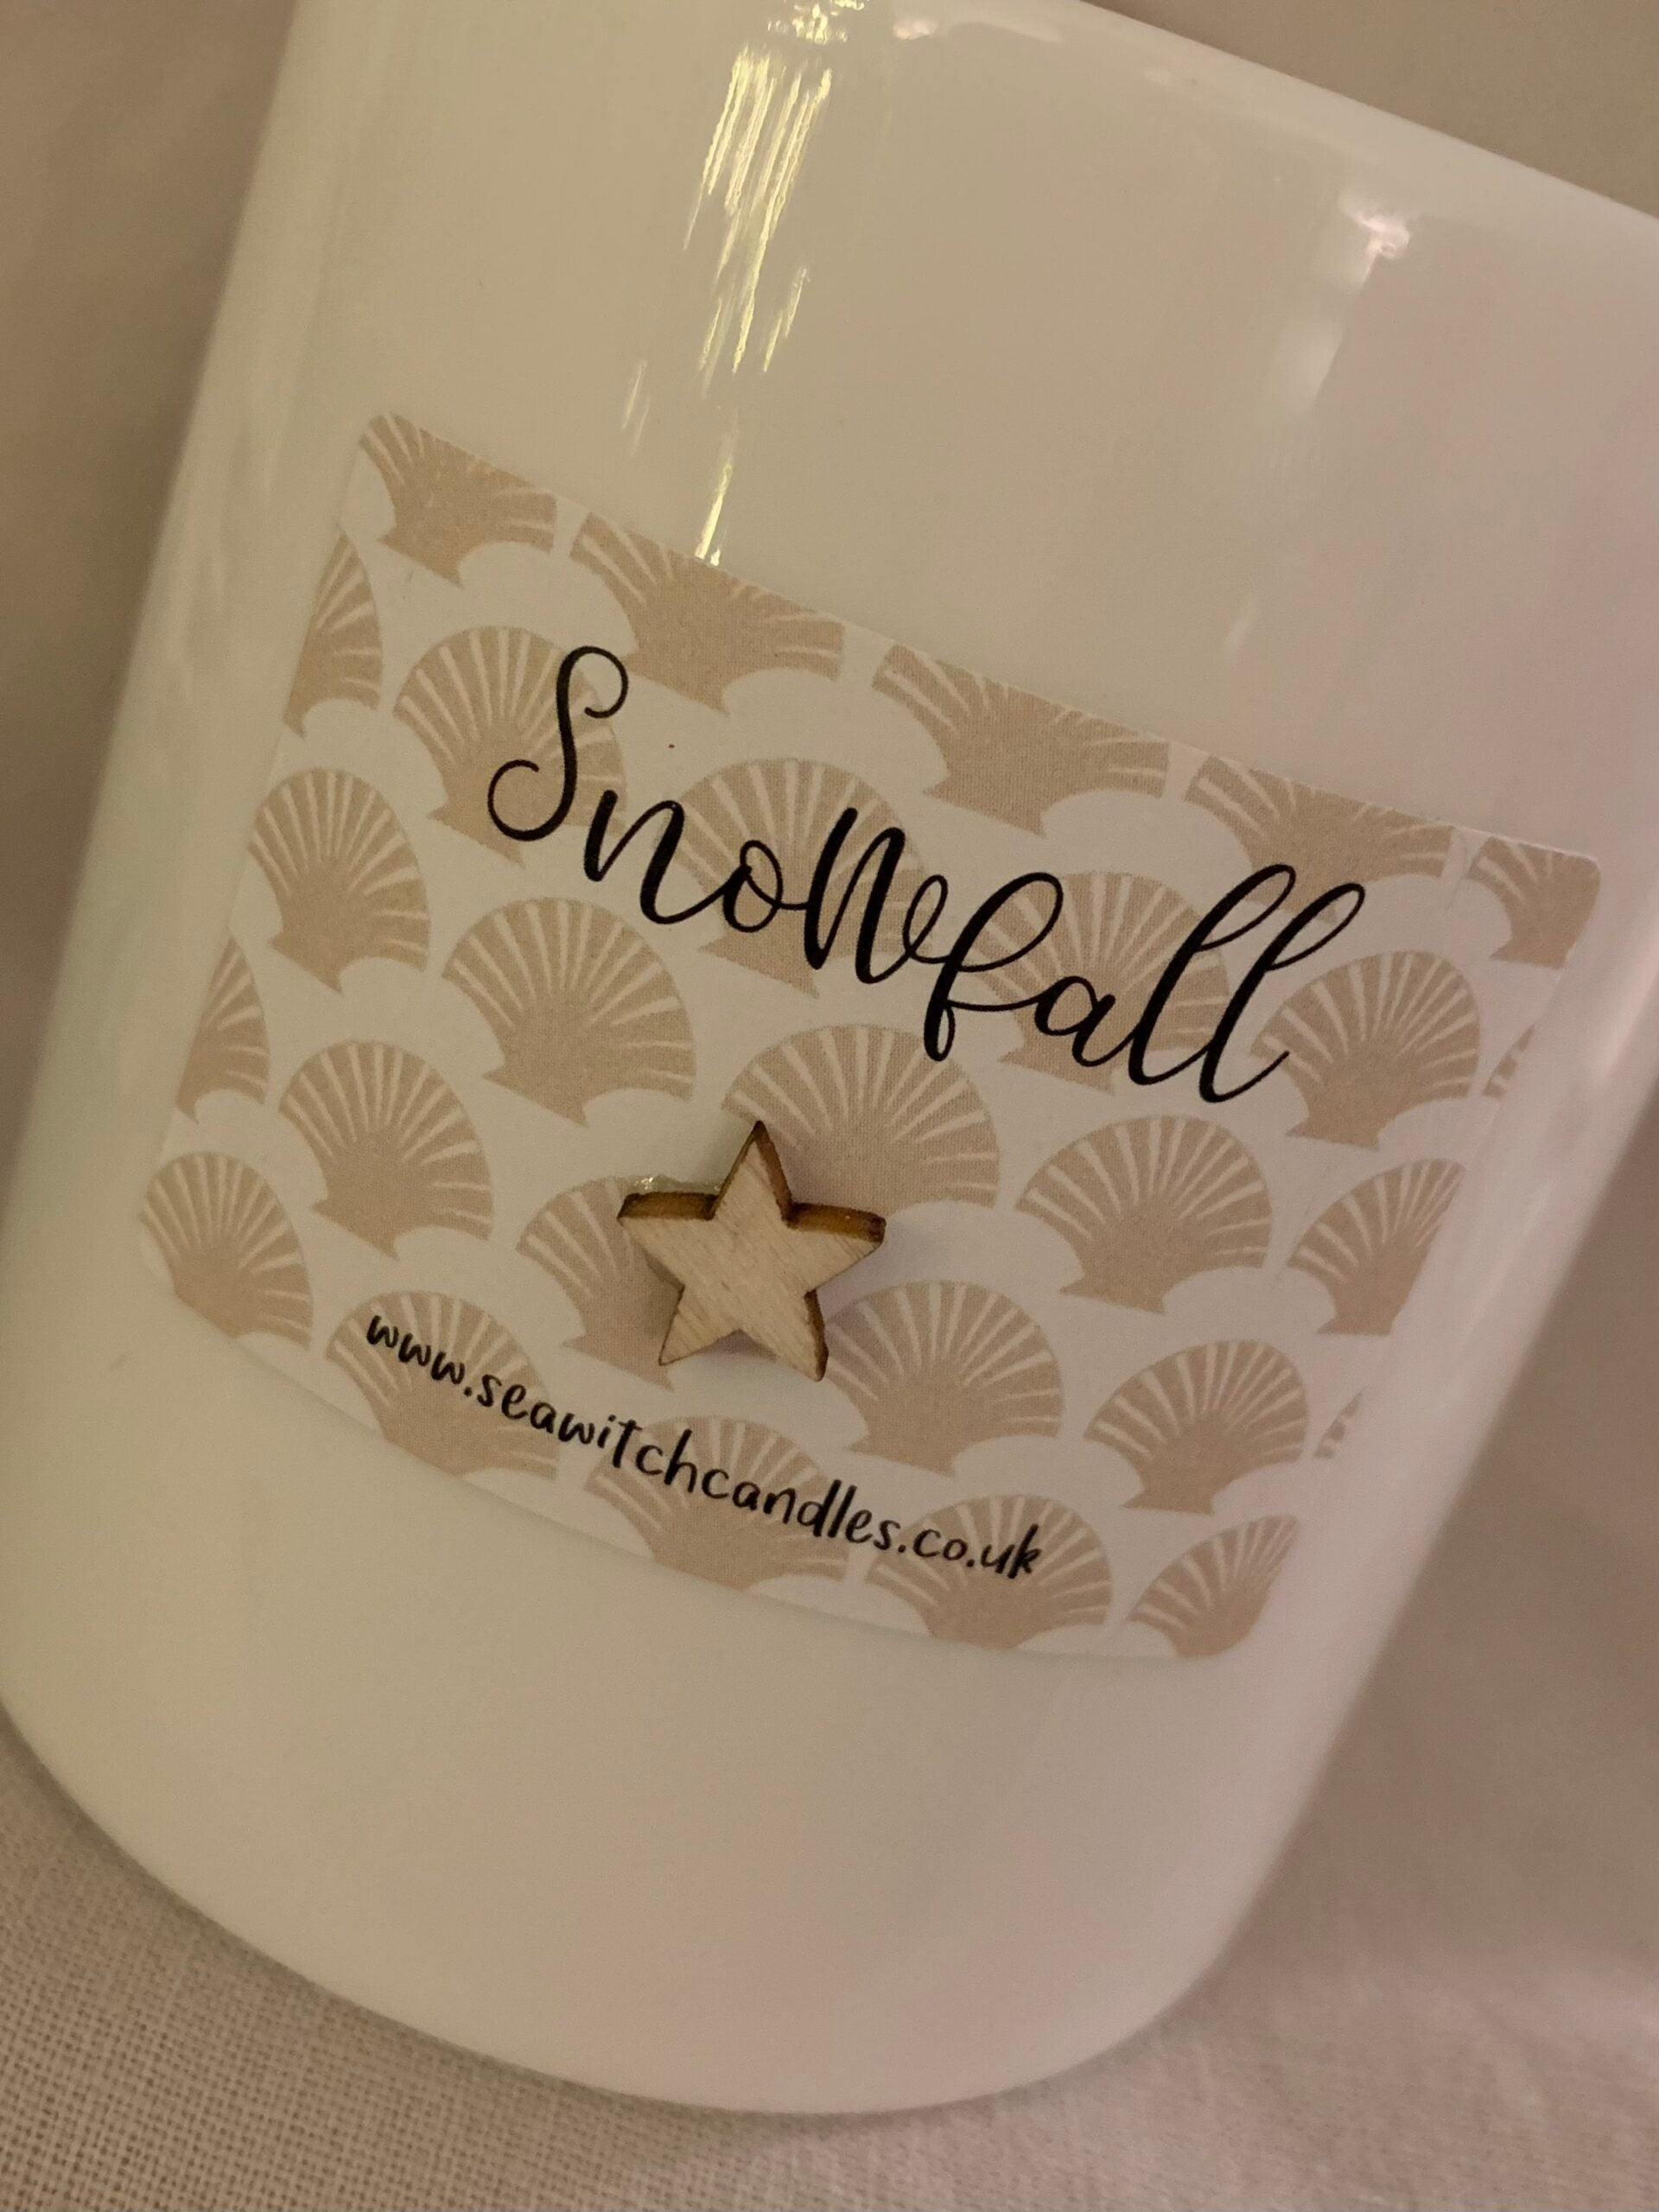 Snowfall Candle  £22  Fresh green top notes layered over warming spices on a base of musk, cedar wood and frankincense  The perfect scent for sitting by a cosy fire watching the snow fall outside  The label is hand finished with a wooden star  &nbsp;Burn time of at least 50 hours&nbsp;   Ingredients: natural vegan plant wax, fragrance oils, cotton wick  &nbsp;This candle is hand poured into a white china pot and is made in Mousehole, Cornwall by Seawitch Candles&nbsp;